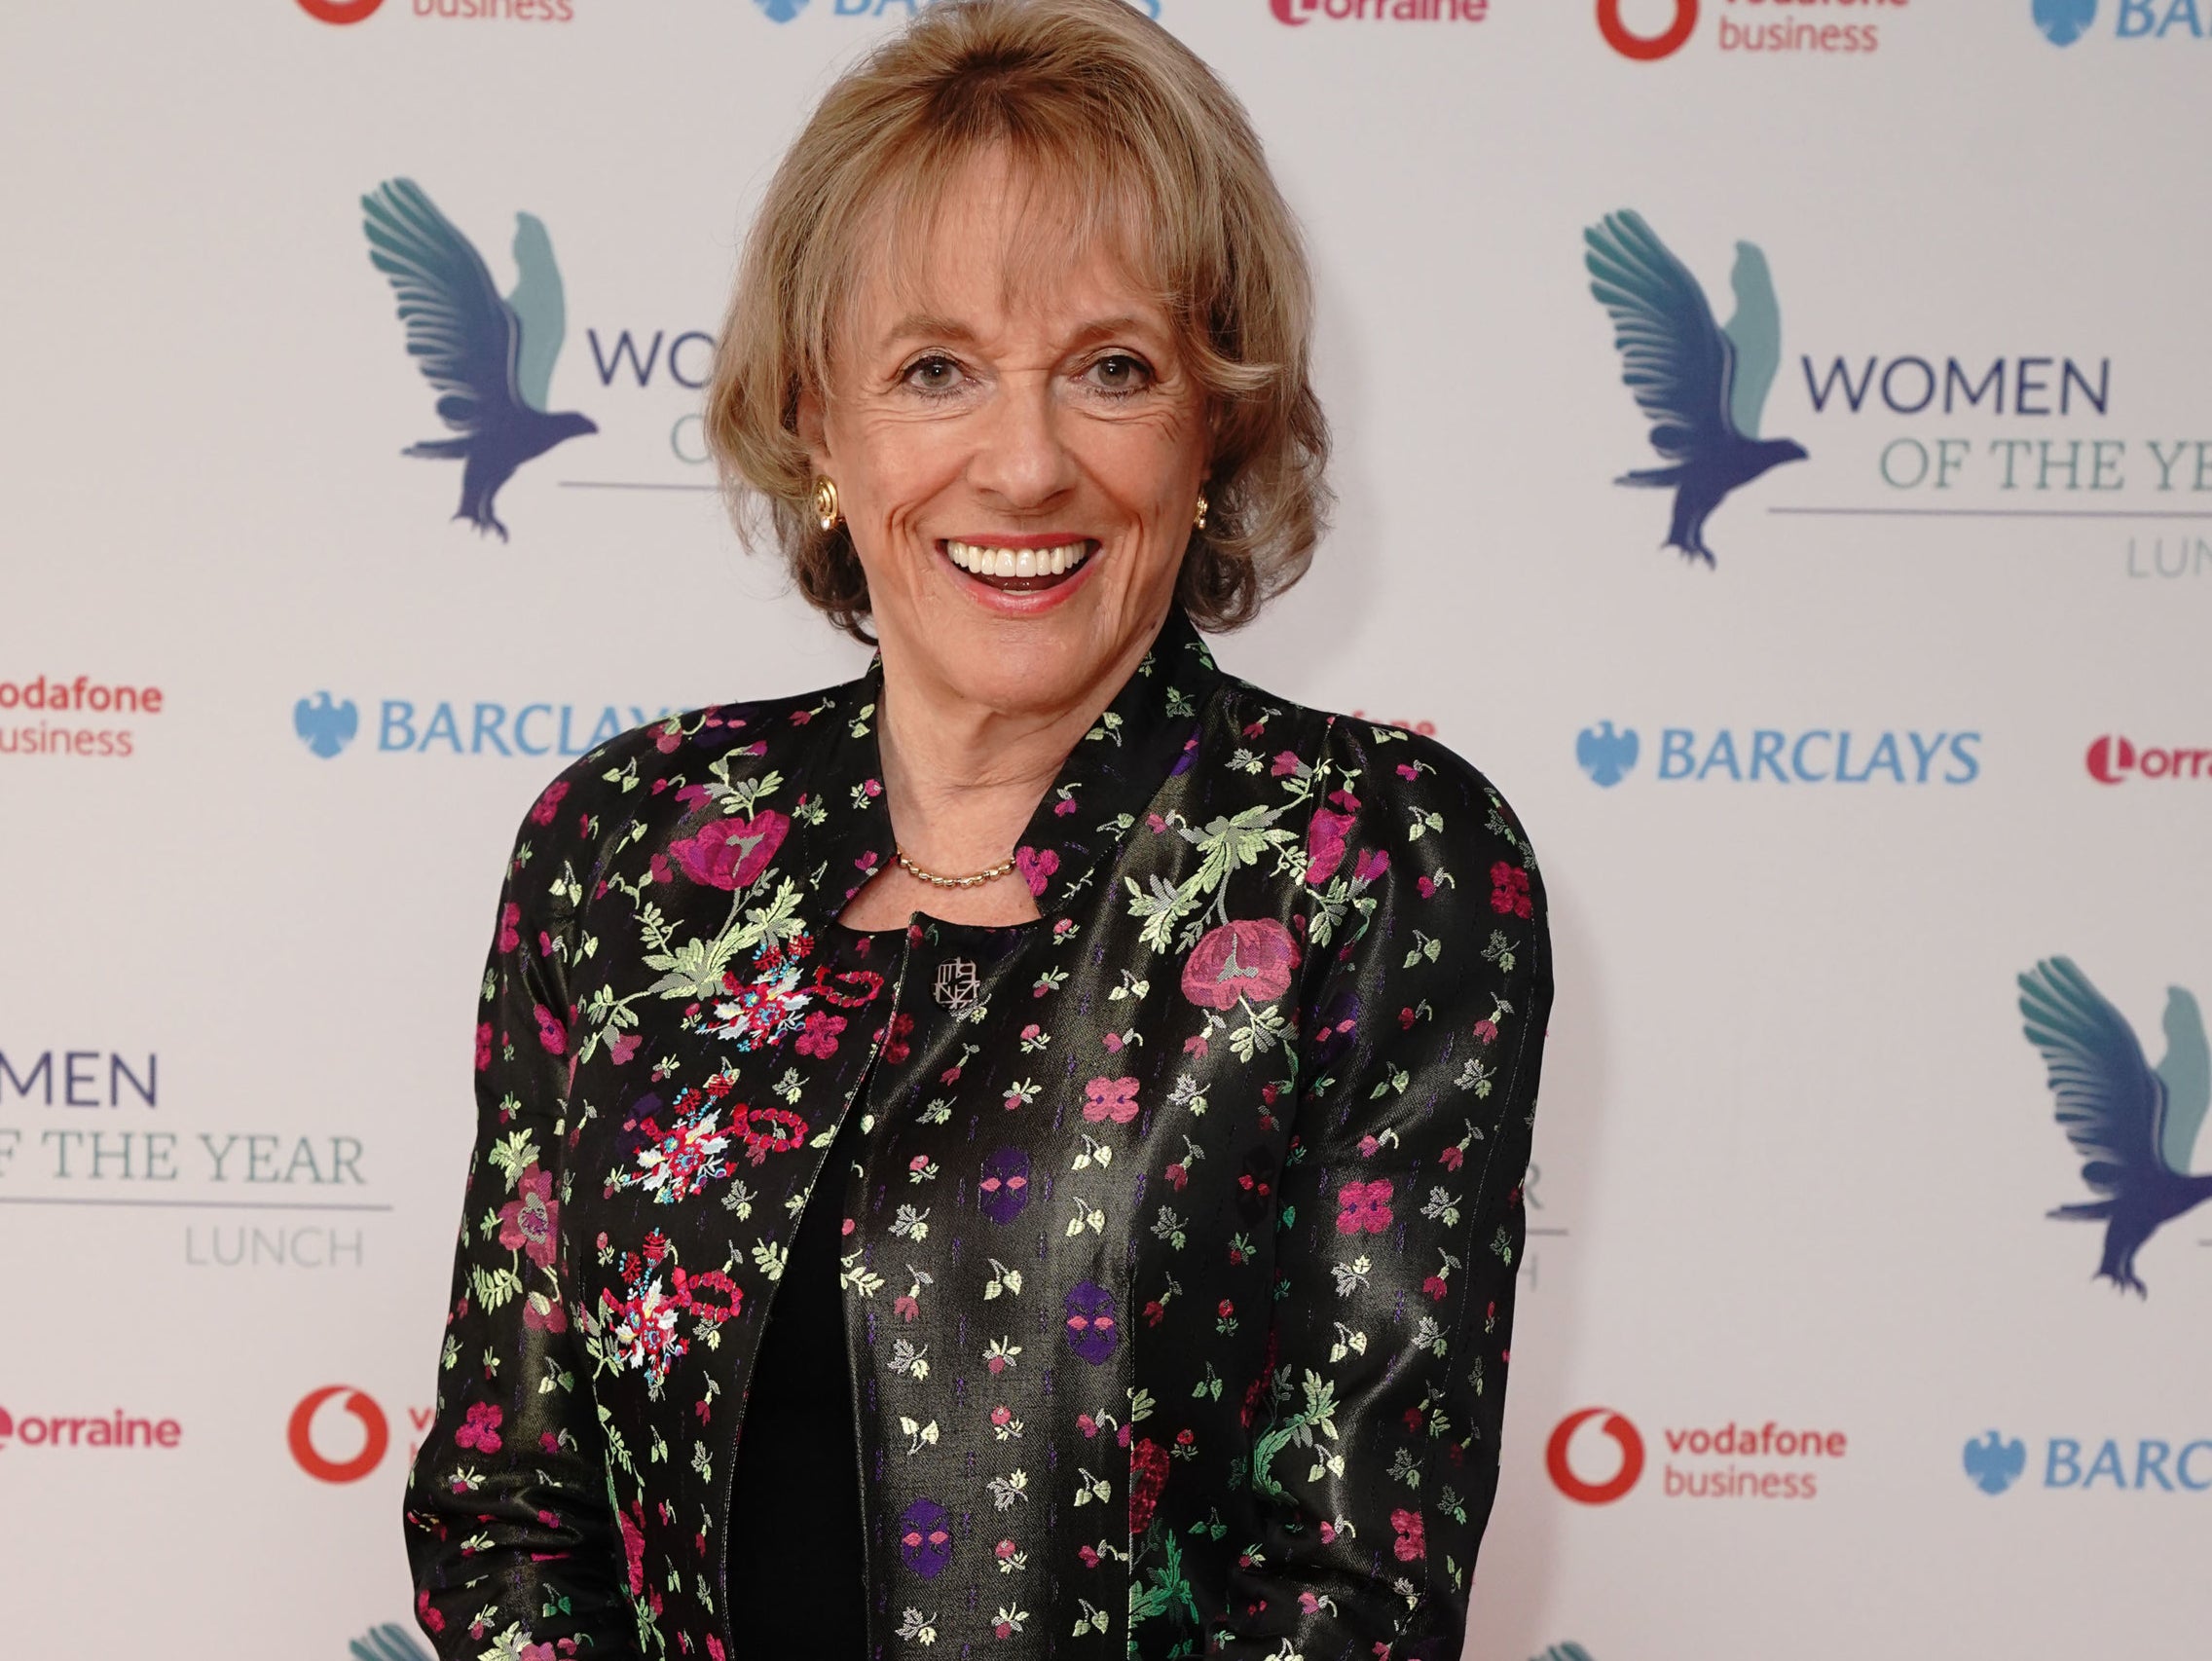 Dame Esther Rantzen has terminal cancer and has revealed she has joined Switzerland-based assisted dying organisation Dignitas